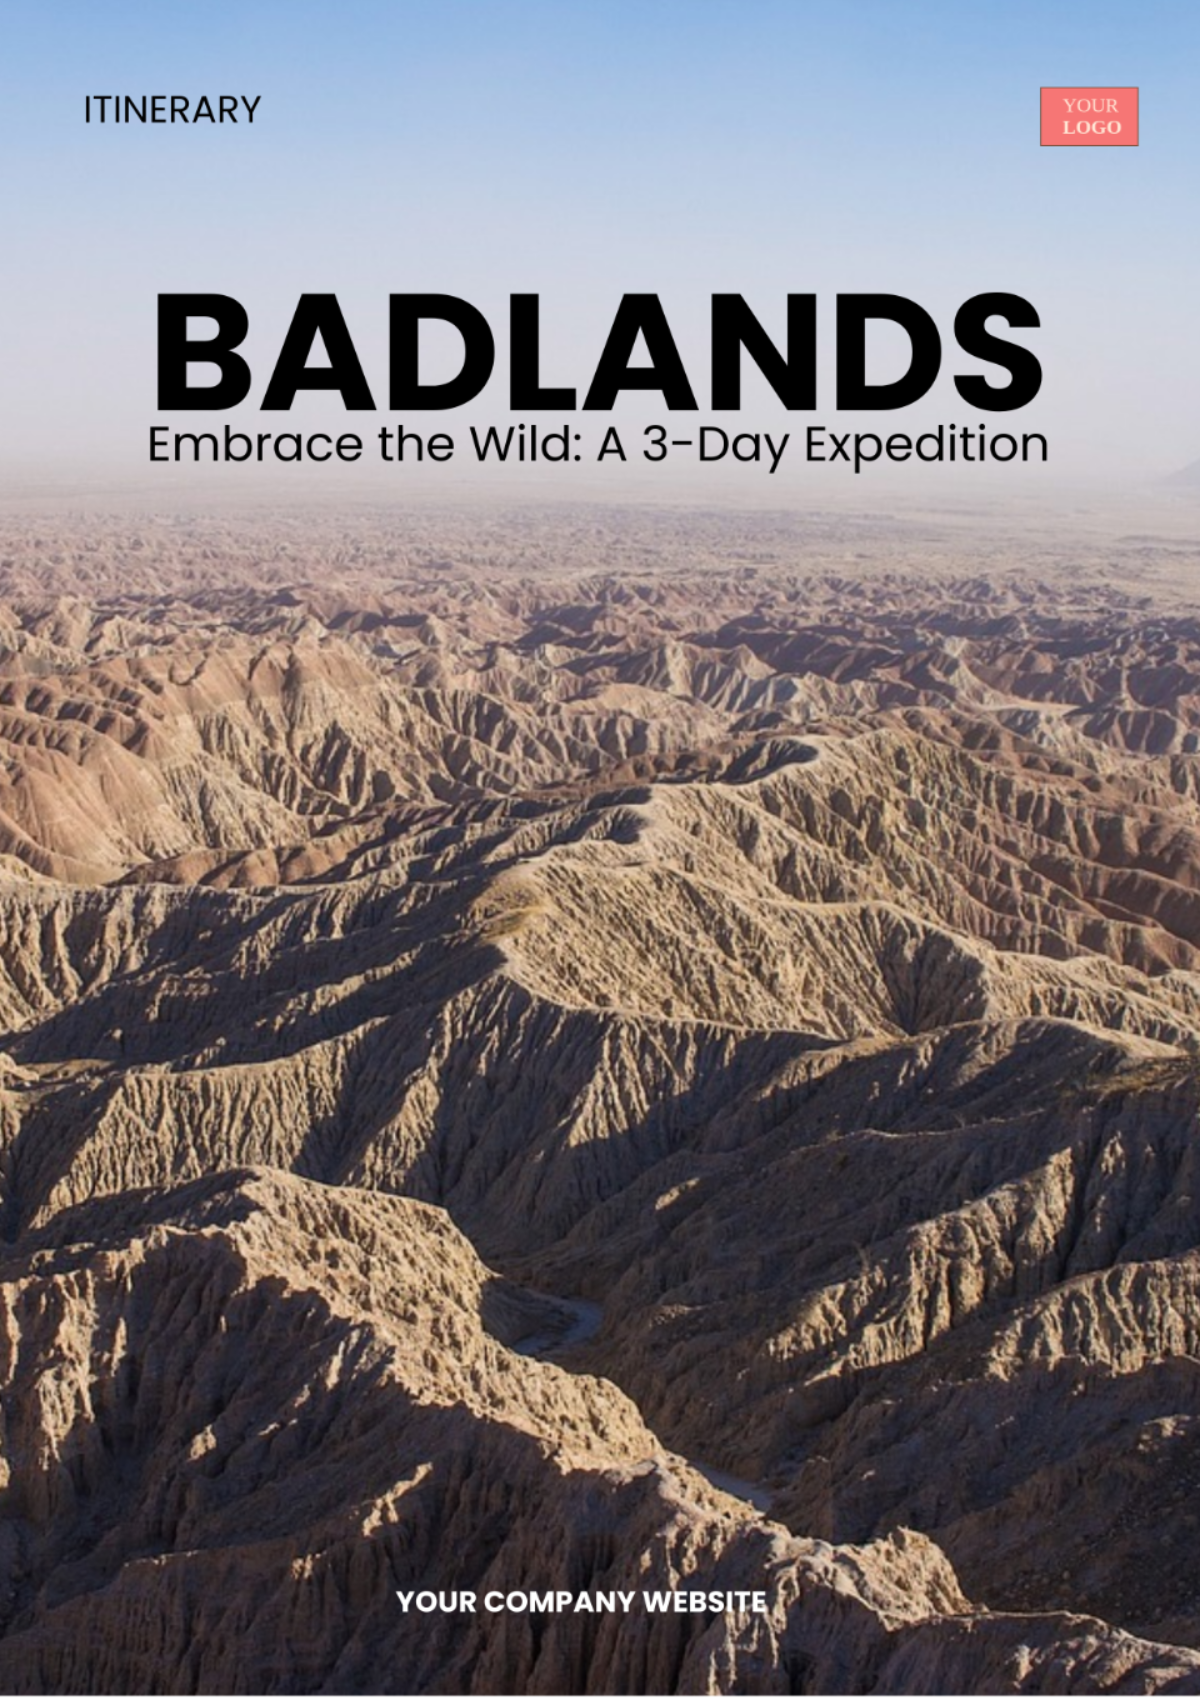 Badlands Itinerary Template